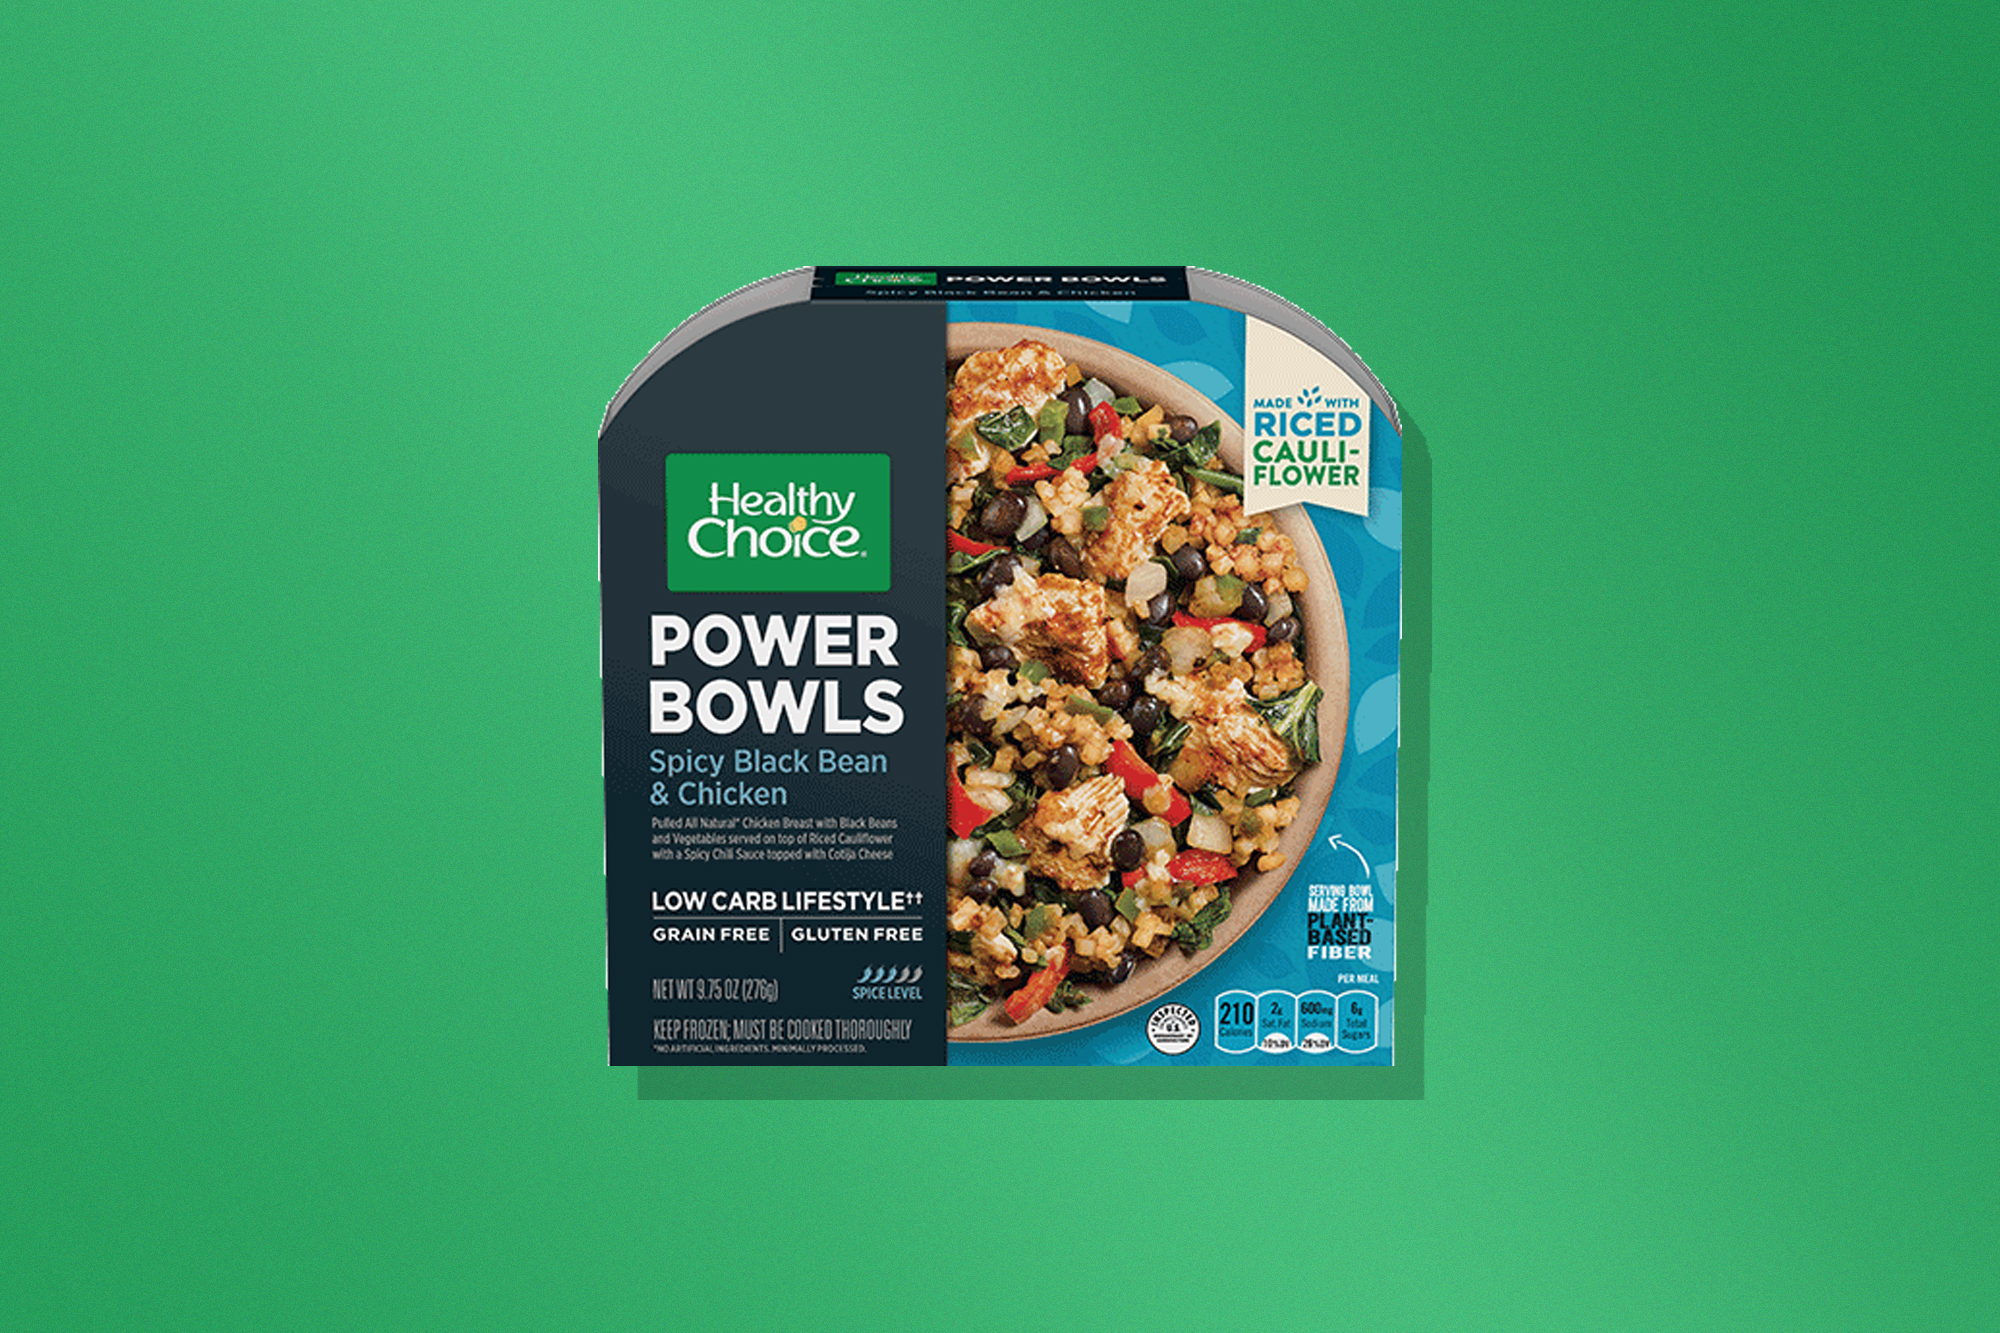 Frozen Food Product Review- Weight Watchers: Chicken Risotto